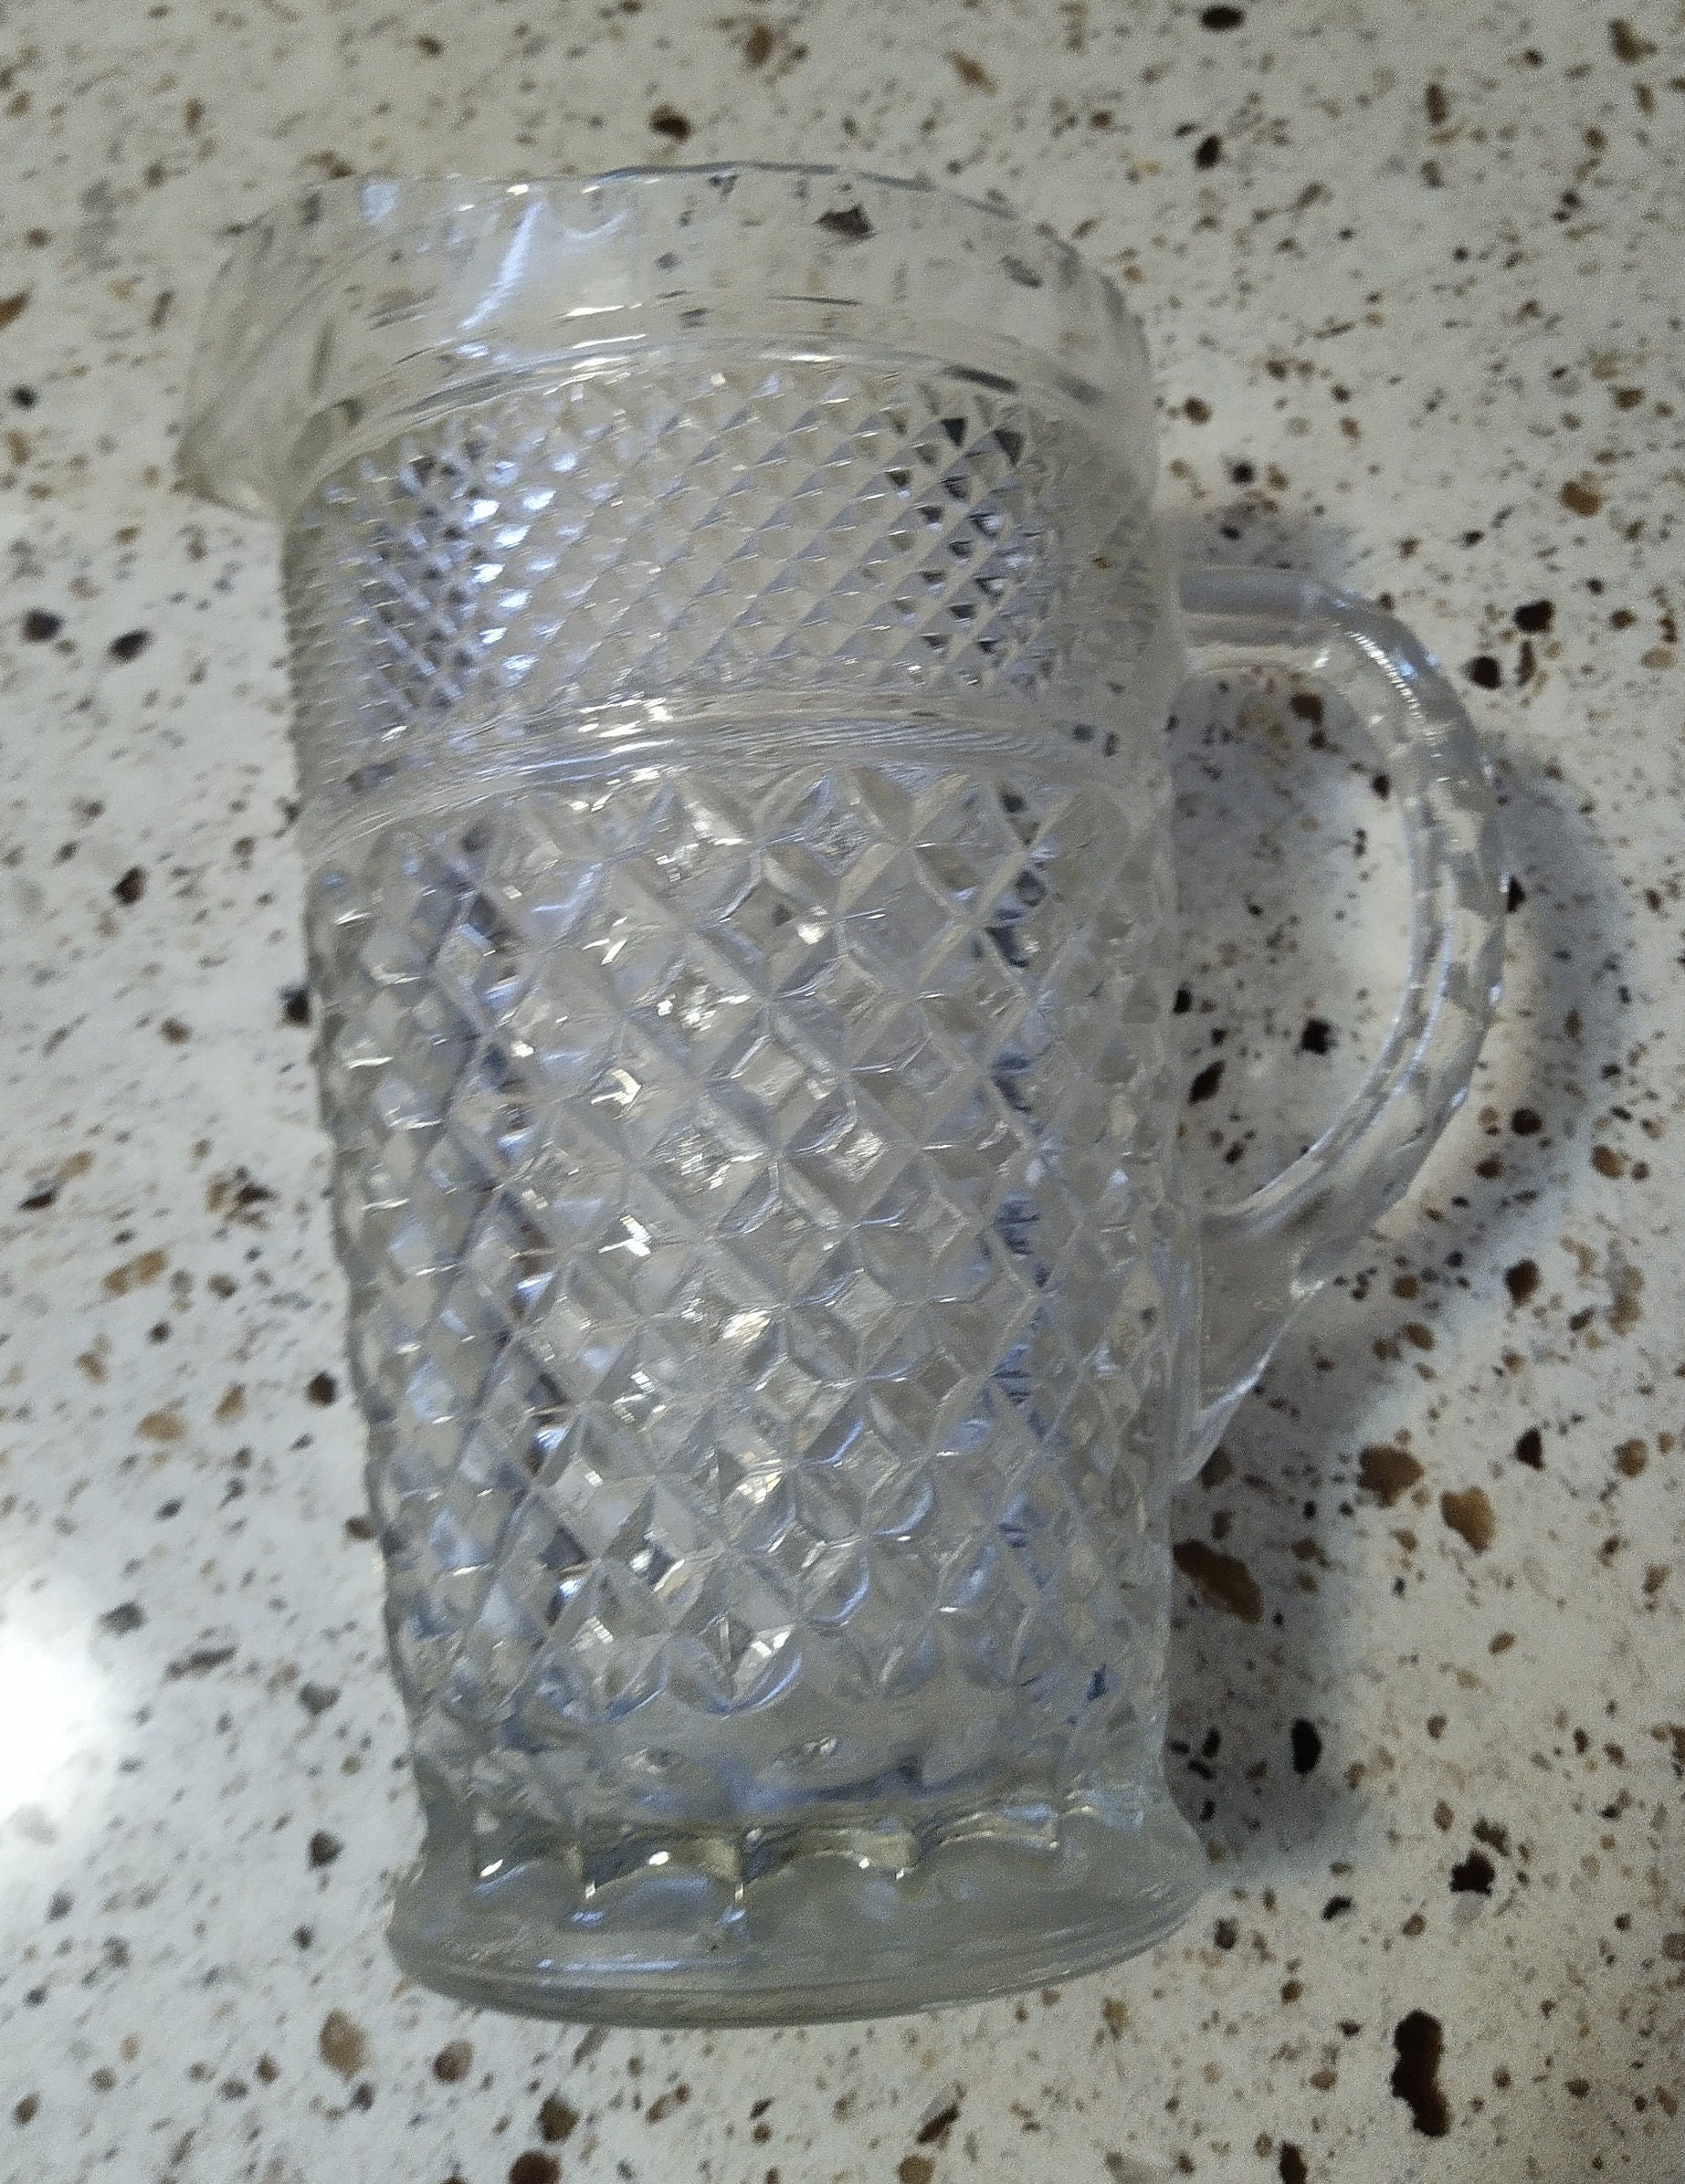 Fake Iced Tea In Unbreakable Poly-carbonate Pitcher